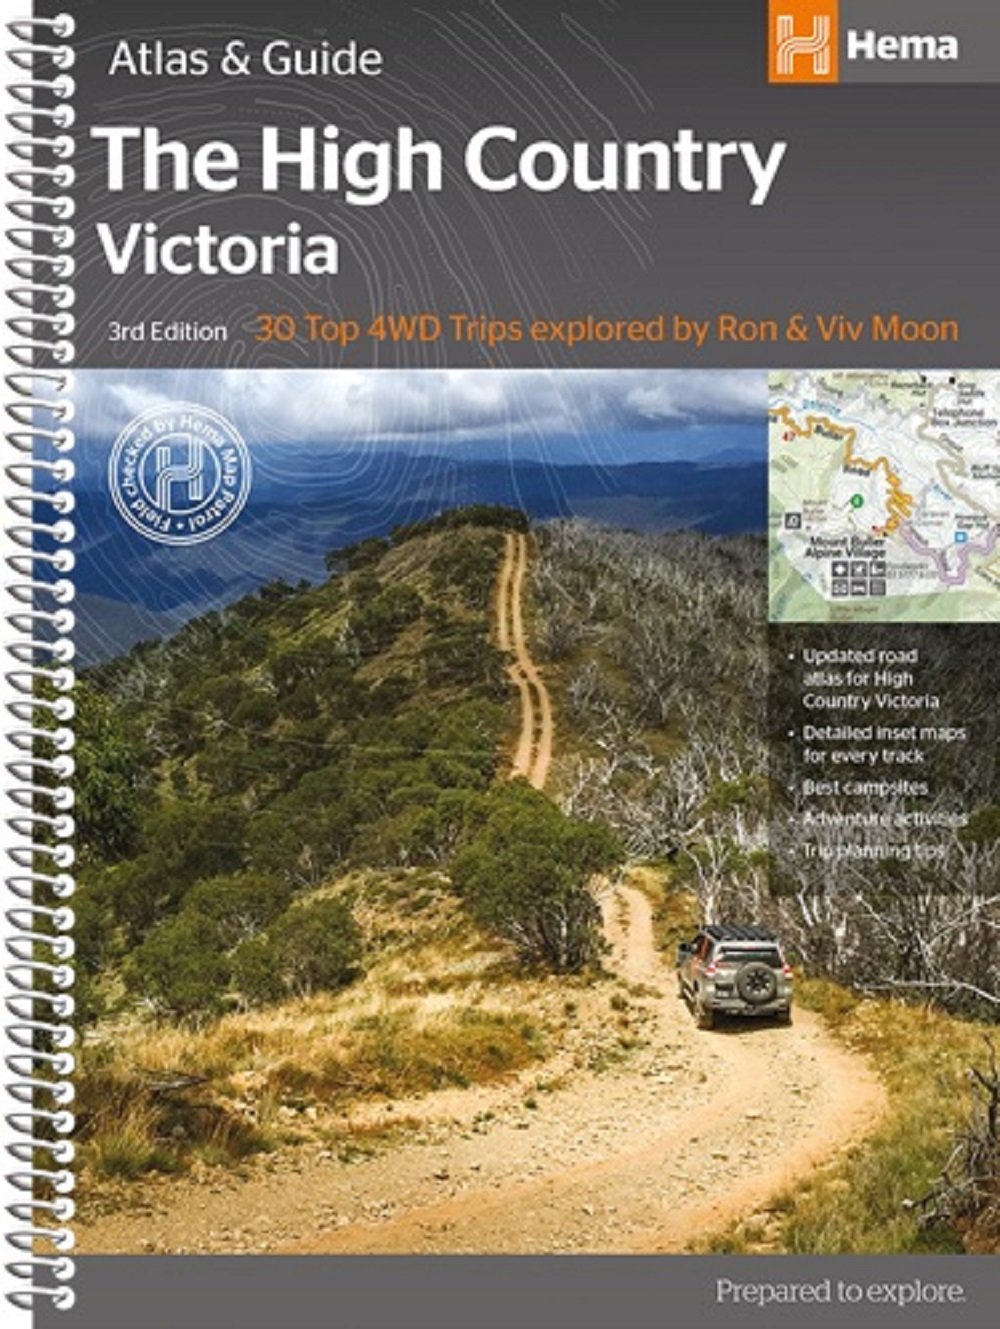 High Country Victoria atlas and guide - Hema